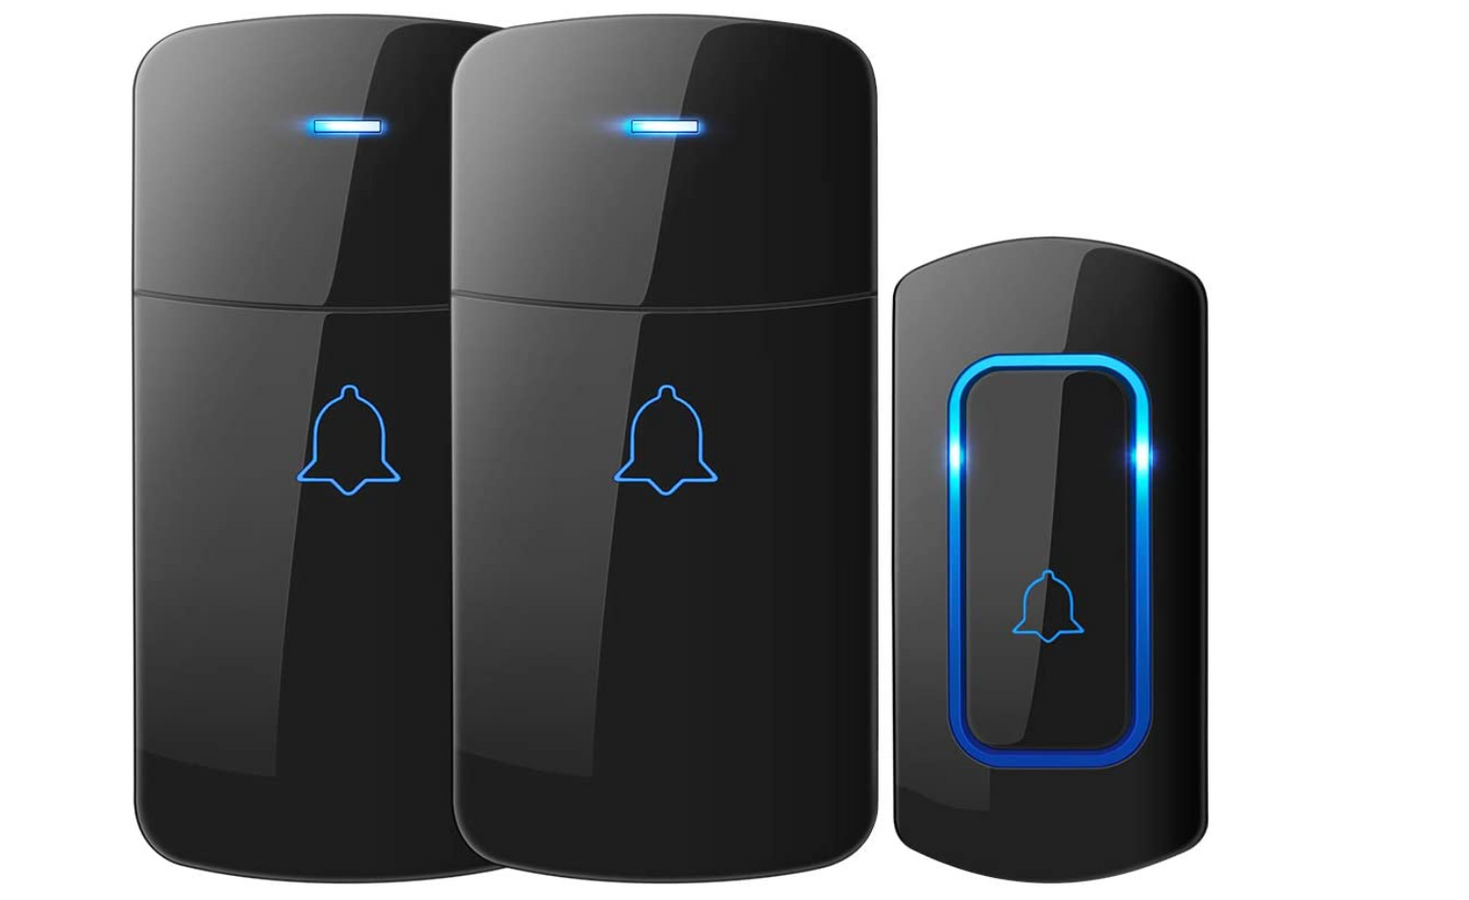 Novete Wireless Doorbell Kit product image of a set of three black doorbell devices featuring blue lights.